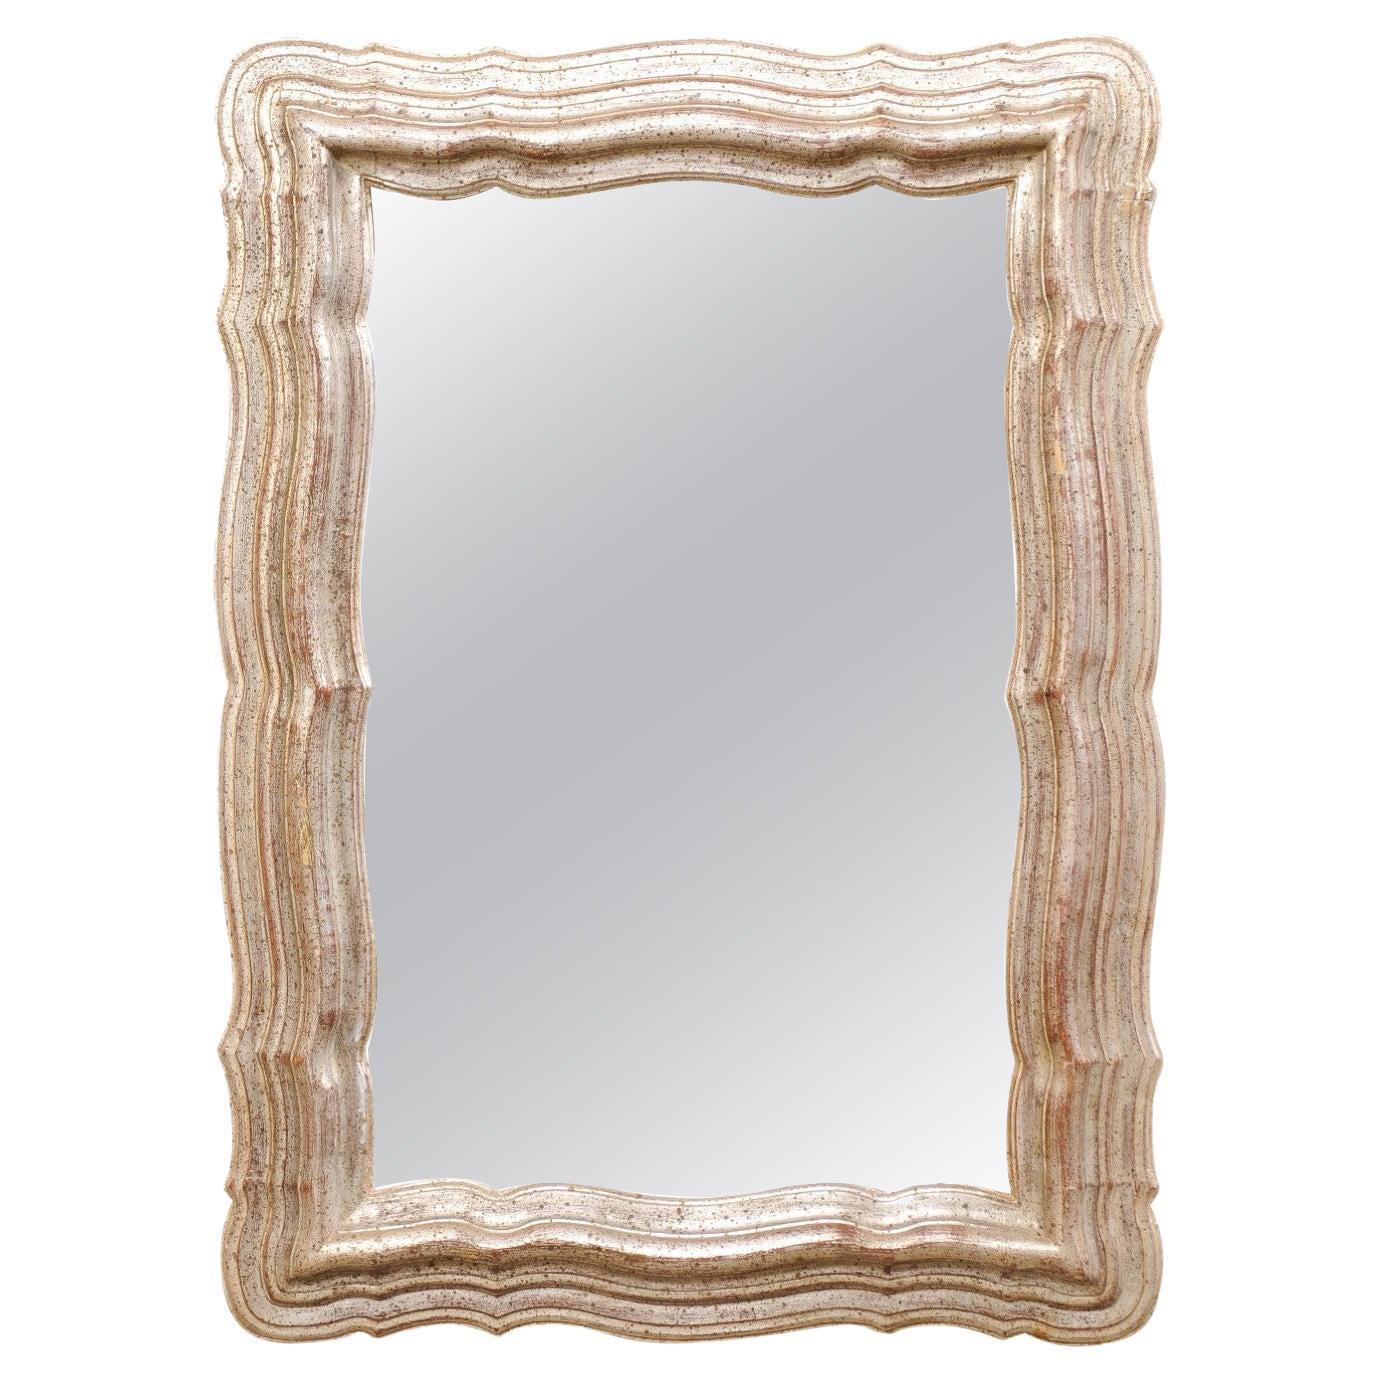 French Mirror with Antiqued-Silver Colored Scalloped Surround